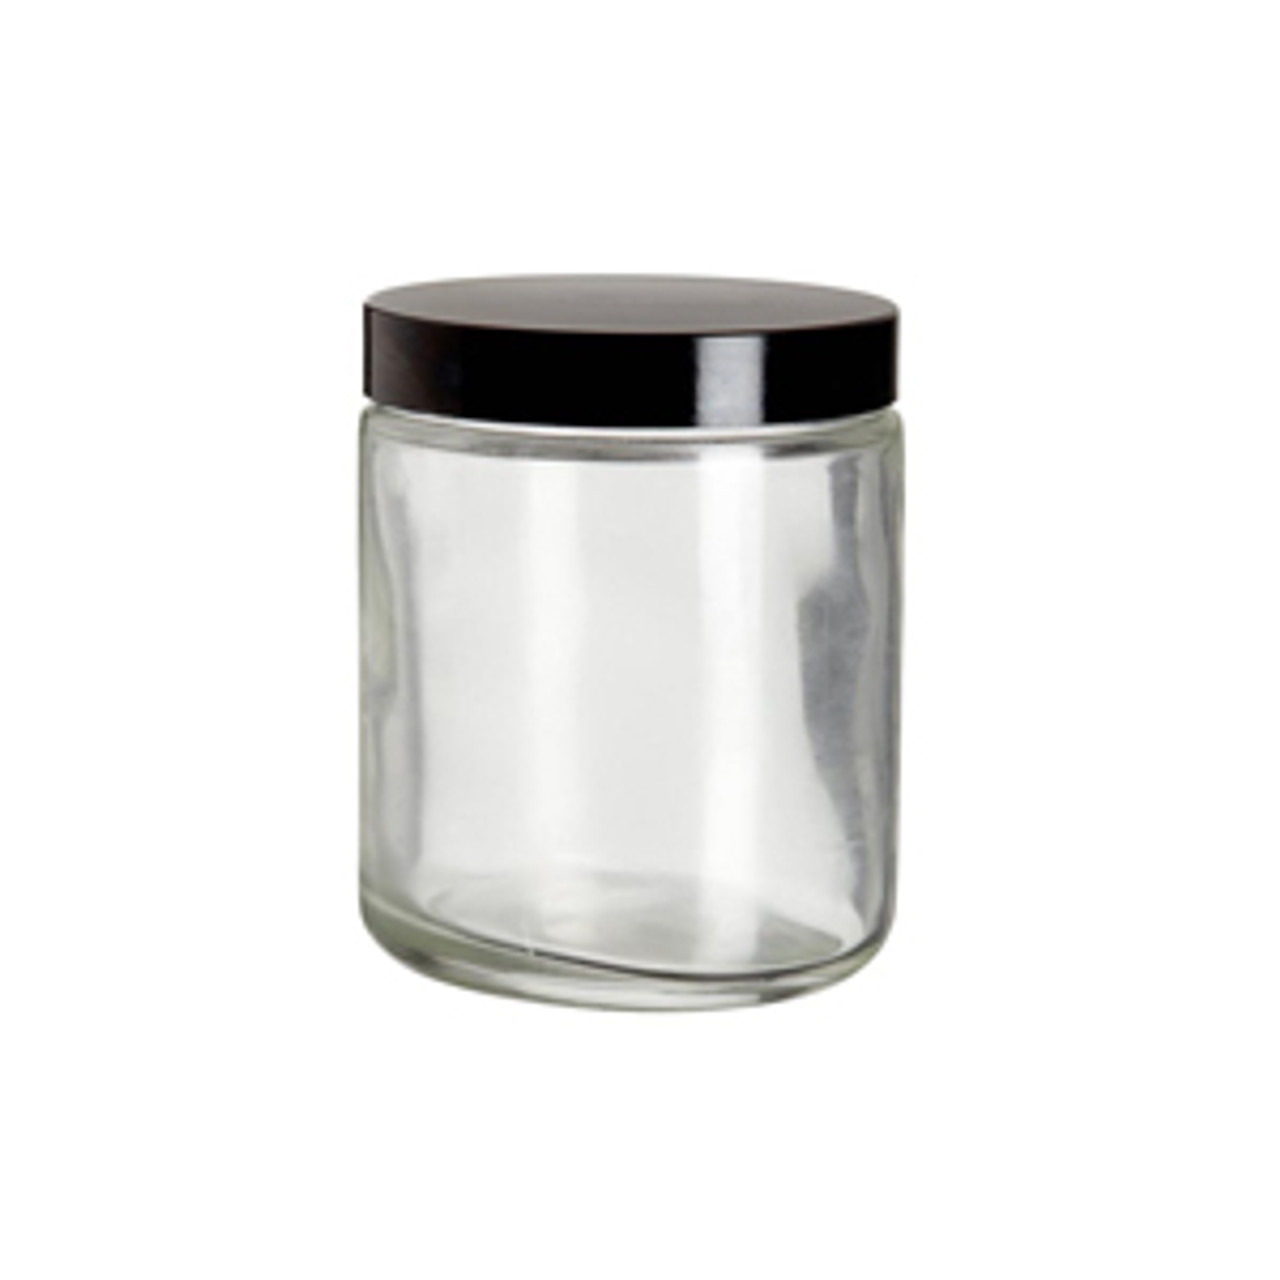 12 pack - Amber, 8 ounce, Round Glass Jars, with Black Lids, Jars